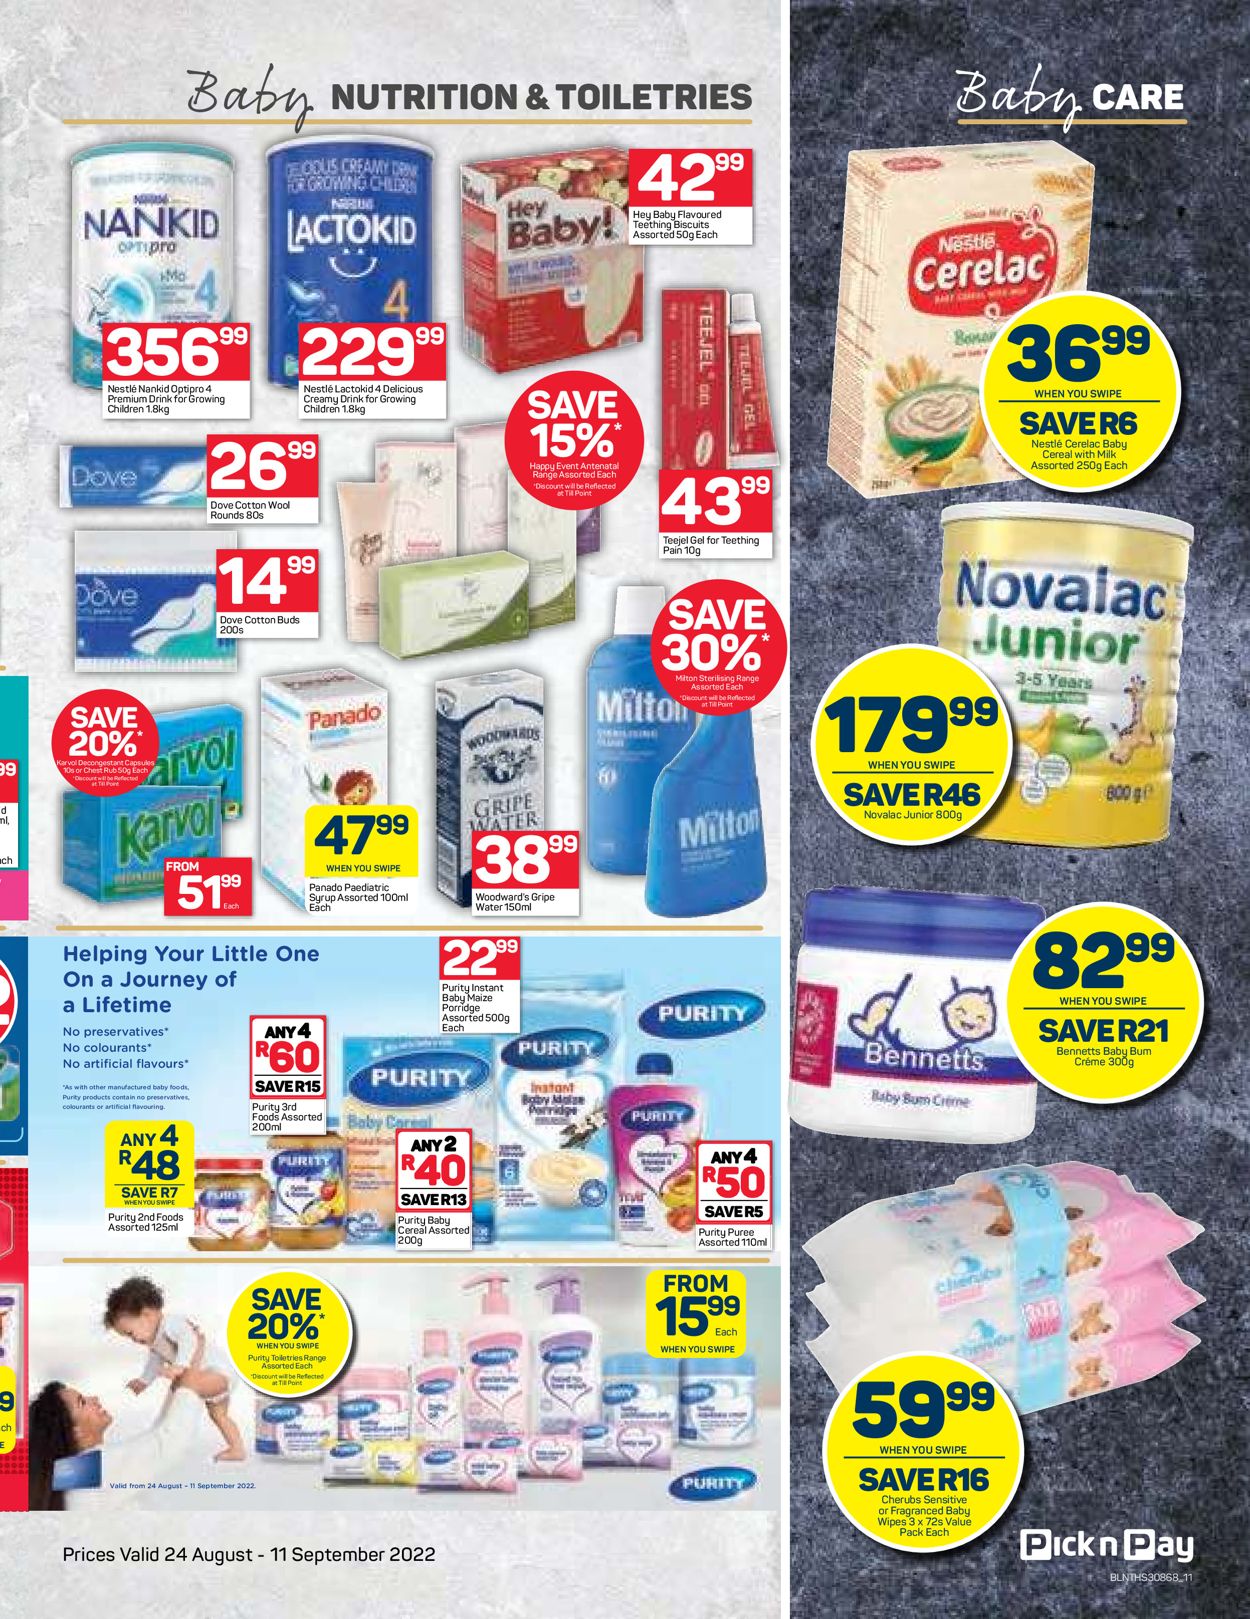 Pick n Pay Catalogue - 2022/08/24-2022/09/11 (Page 11)